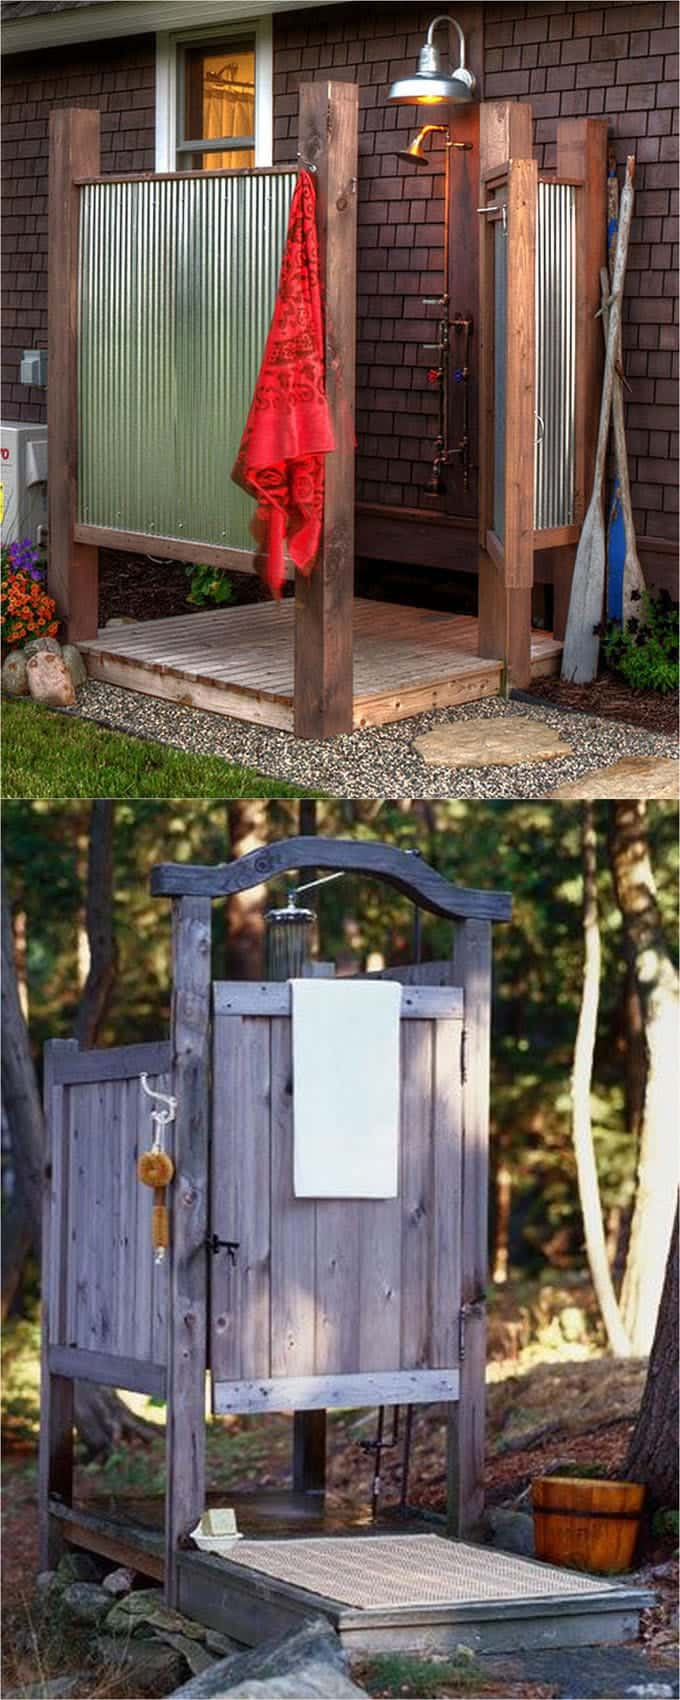 DIY Outdoor Shower Enclosure
 32 Beautiful DIY Outdoor Shower Ideas for the Best